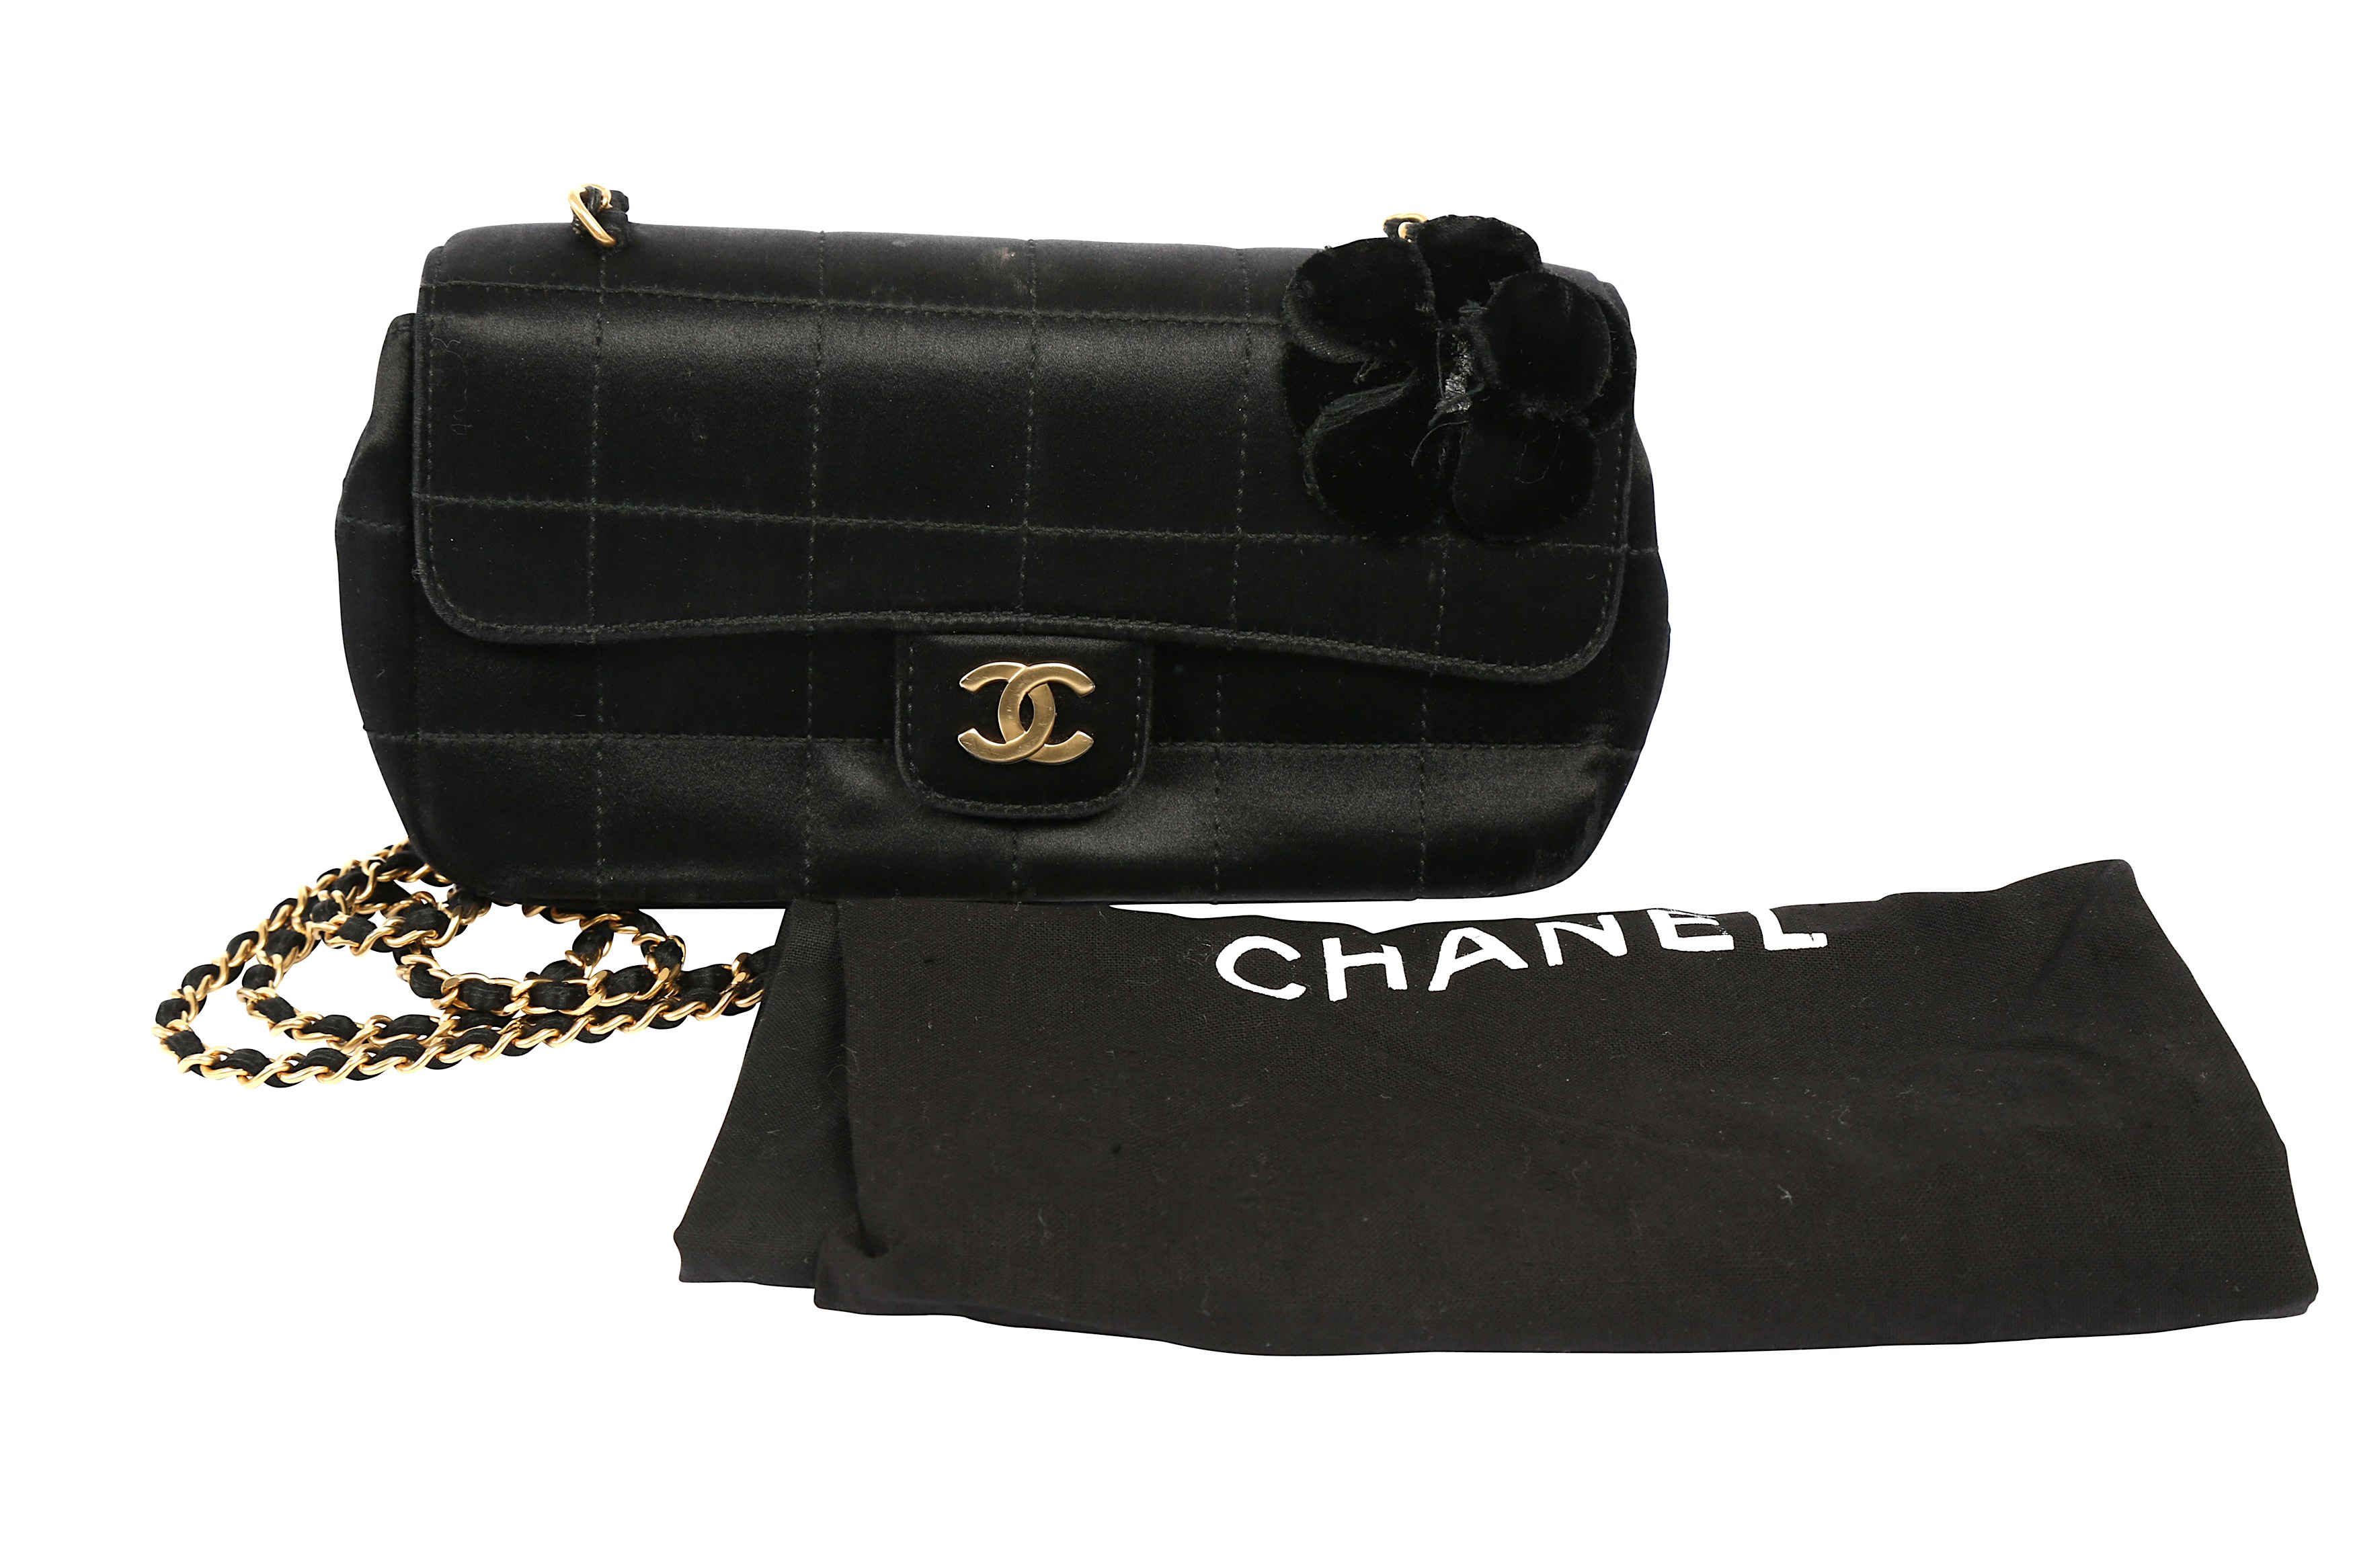 Sold at Auction: A Chanel quilted black satin evening bag, 2000-2002